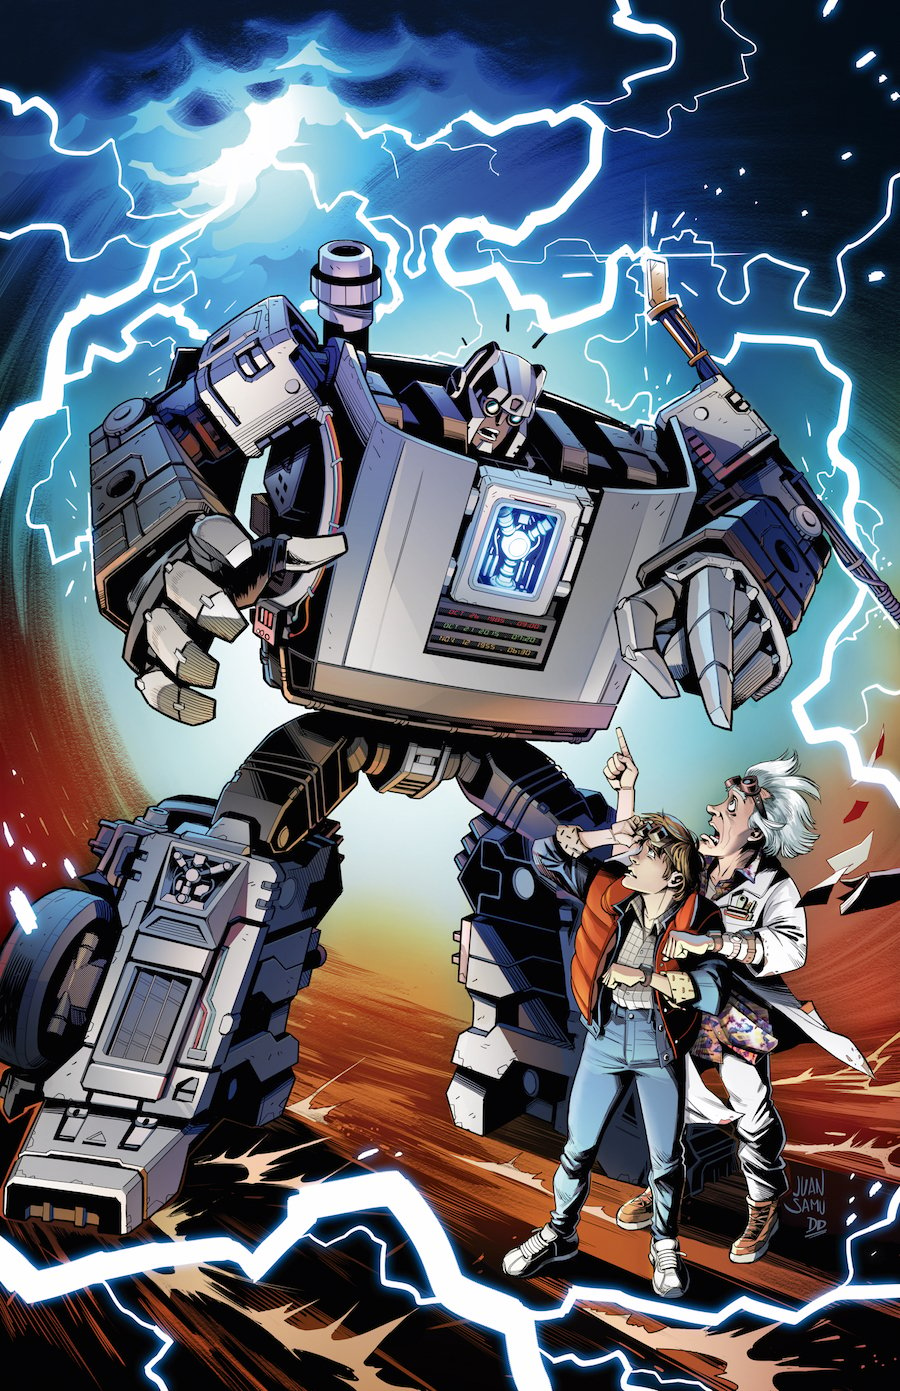 There's Now a Back to the Future Transformer Called "Gigawatt"